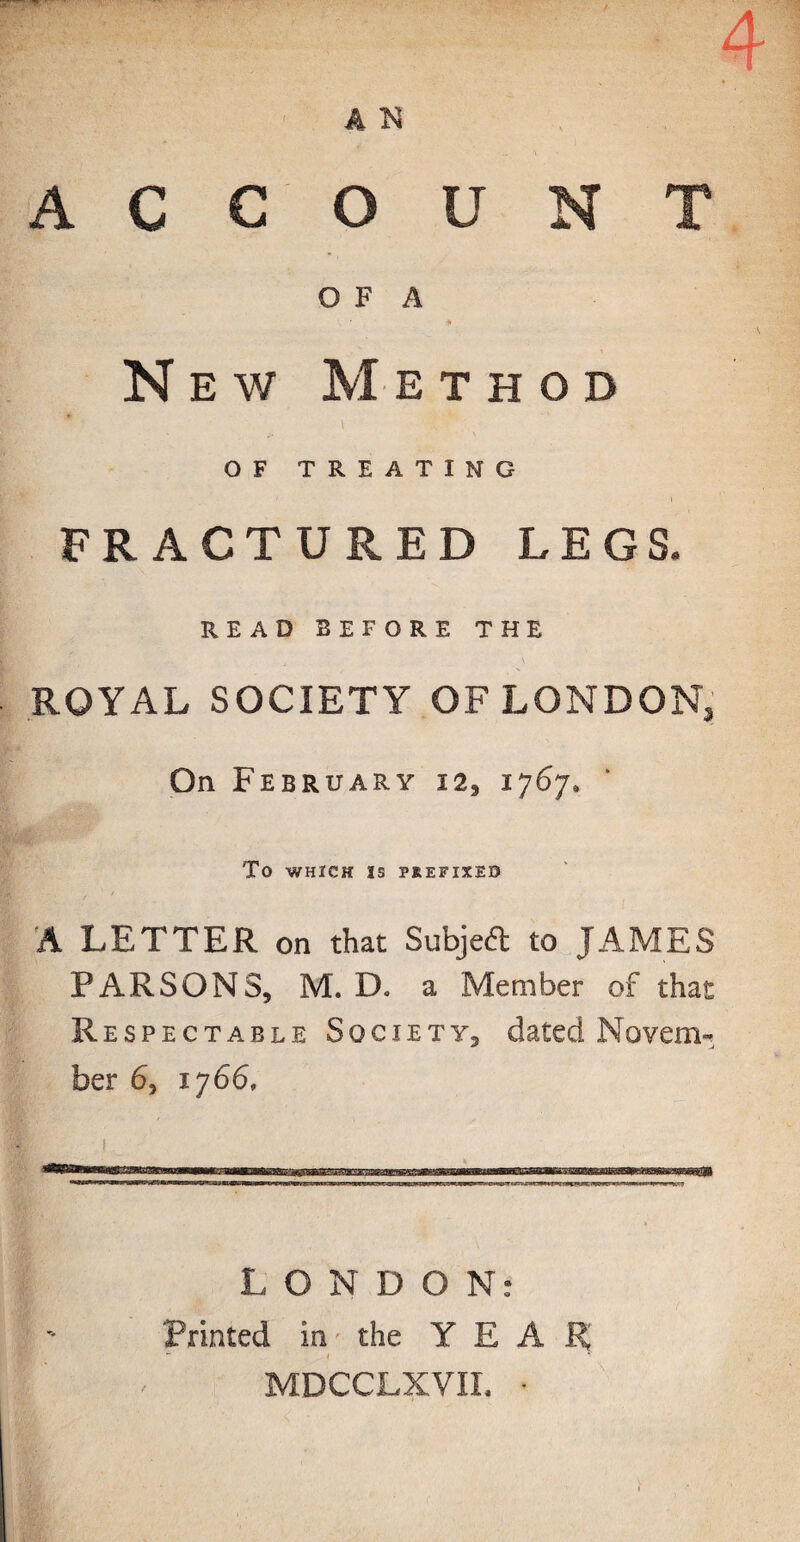 ACCOUNT O F A New Method p-.yw? v1 OF TREATING 1 » FRACTURED LEGS. READ BEFORE THE ROYAL SOCIETY OF LONDON, On February 12, 1767, To WHICH IS PREFIXED A LETTER on that Subject to JAMES PARSONS, M. D. a Member of that Respectable Society, dated Novem¬ ber 6, 1766, LONDON: Printed in the YEAR MDCCLXVII. •